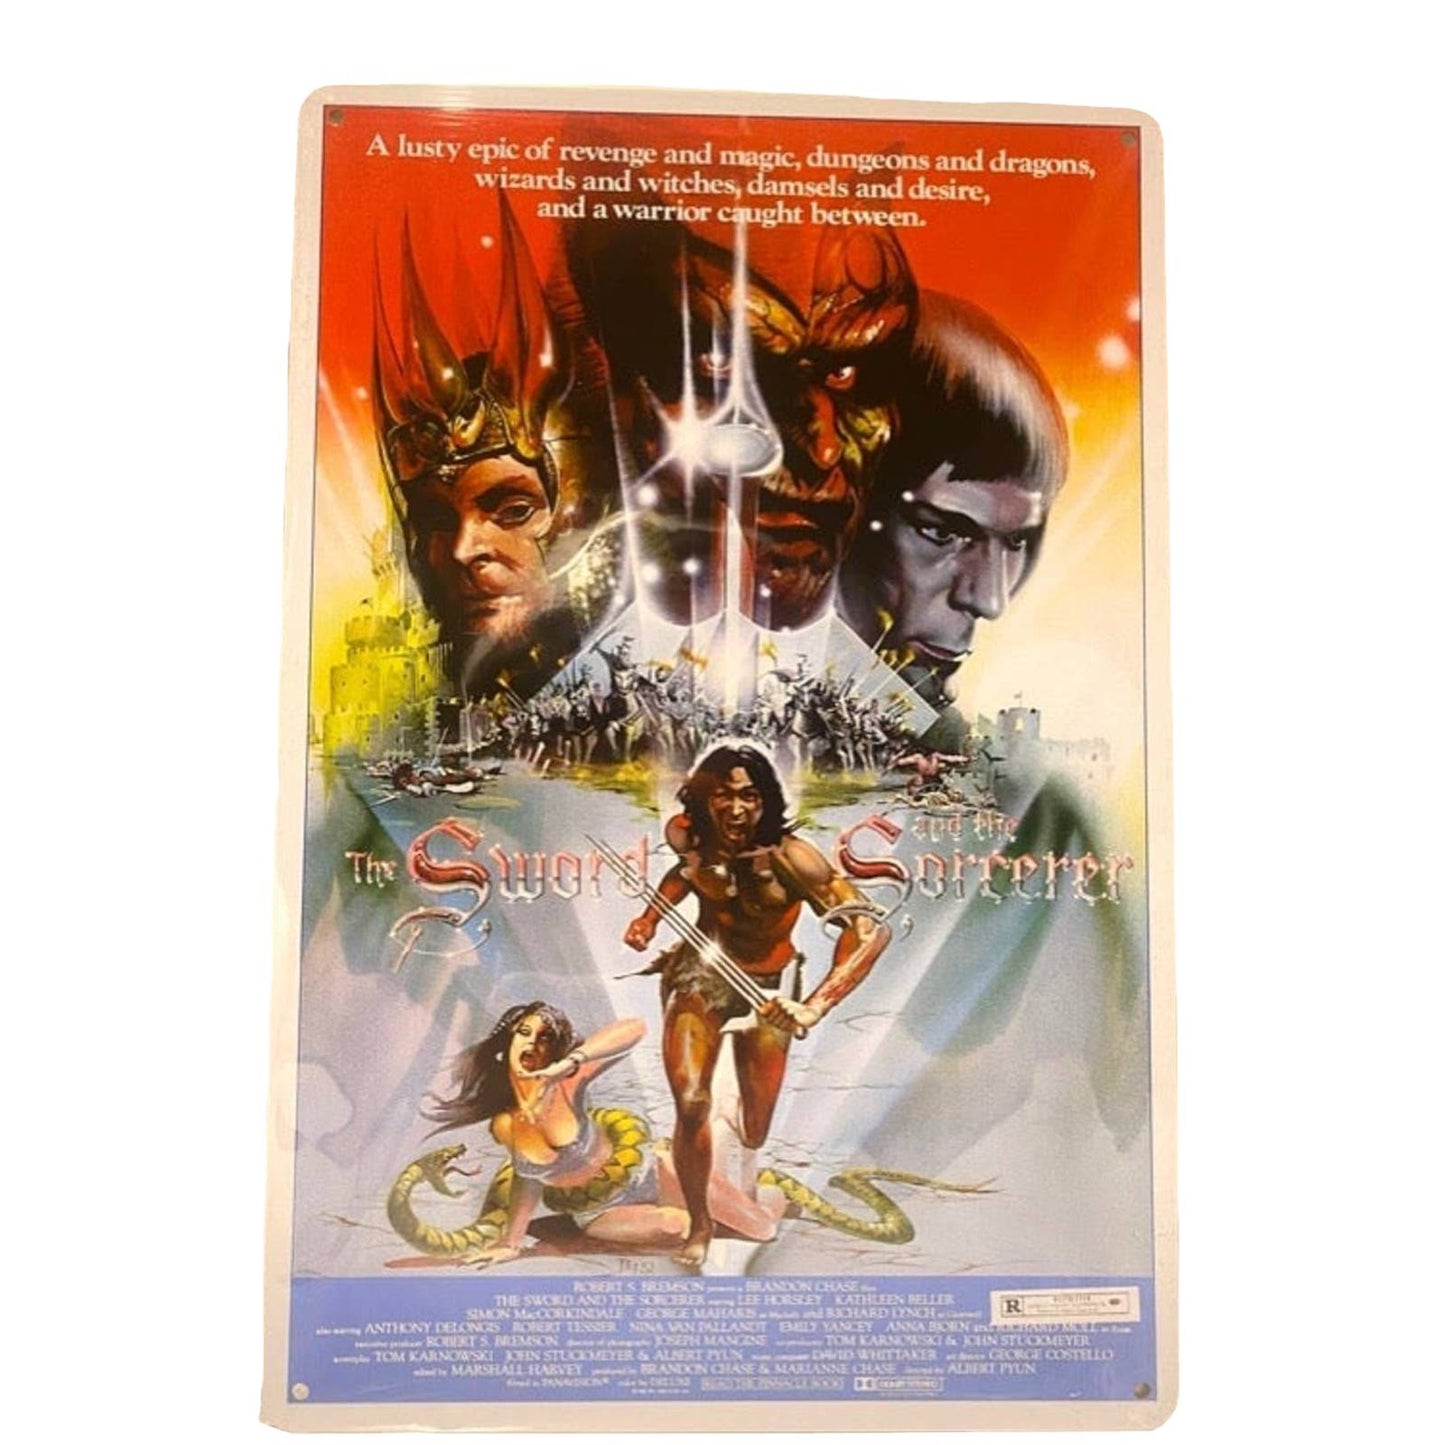 The Sword and the Sorcerer Movie Poster Metal Tin Sign 8"x12"